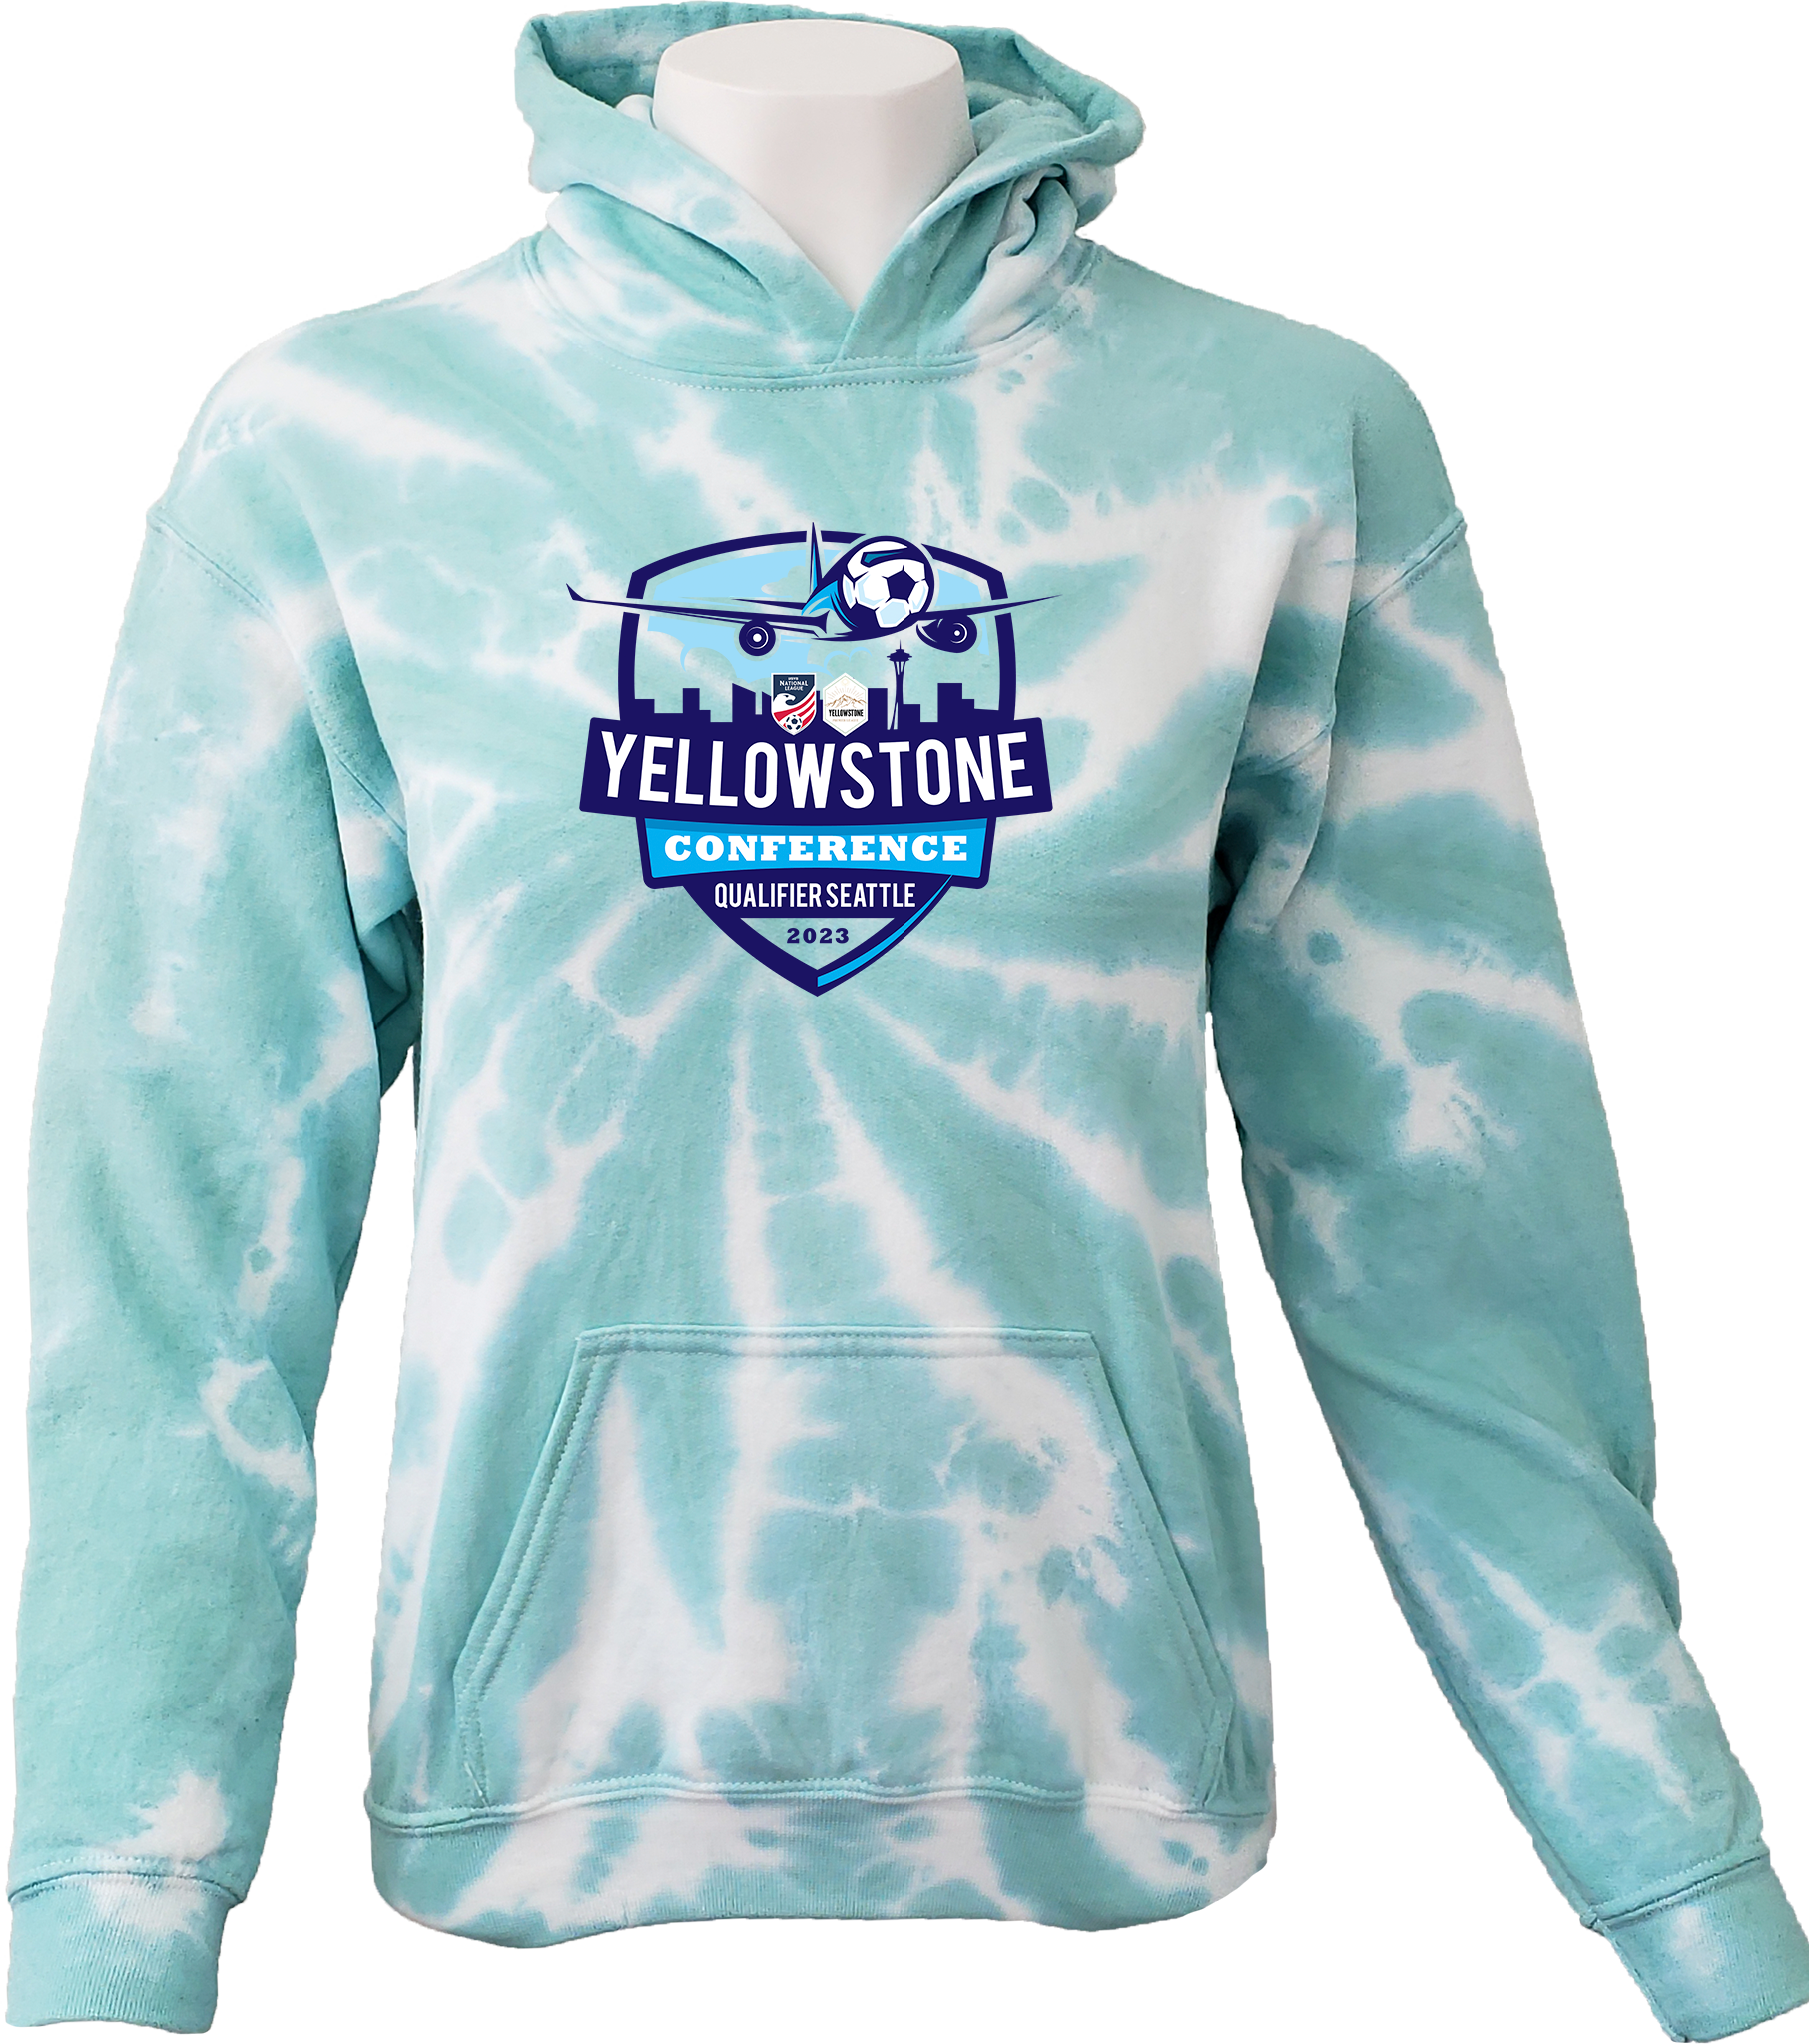 TIE-DYE HOODIES - 2023 Yellowstone Conference Qualifier Seattle